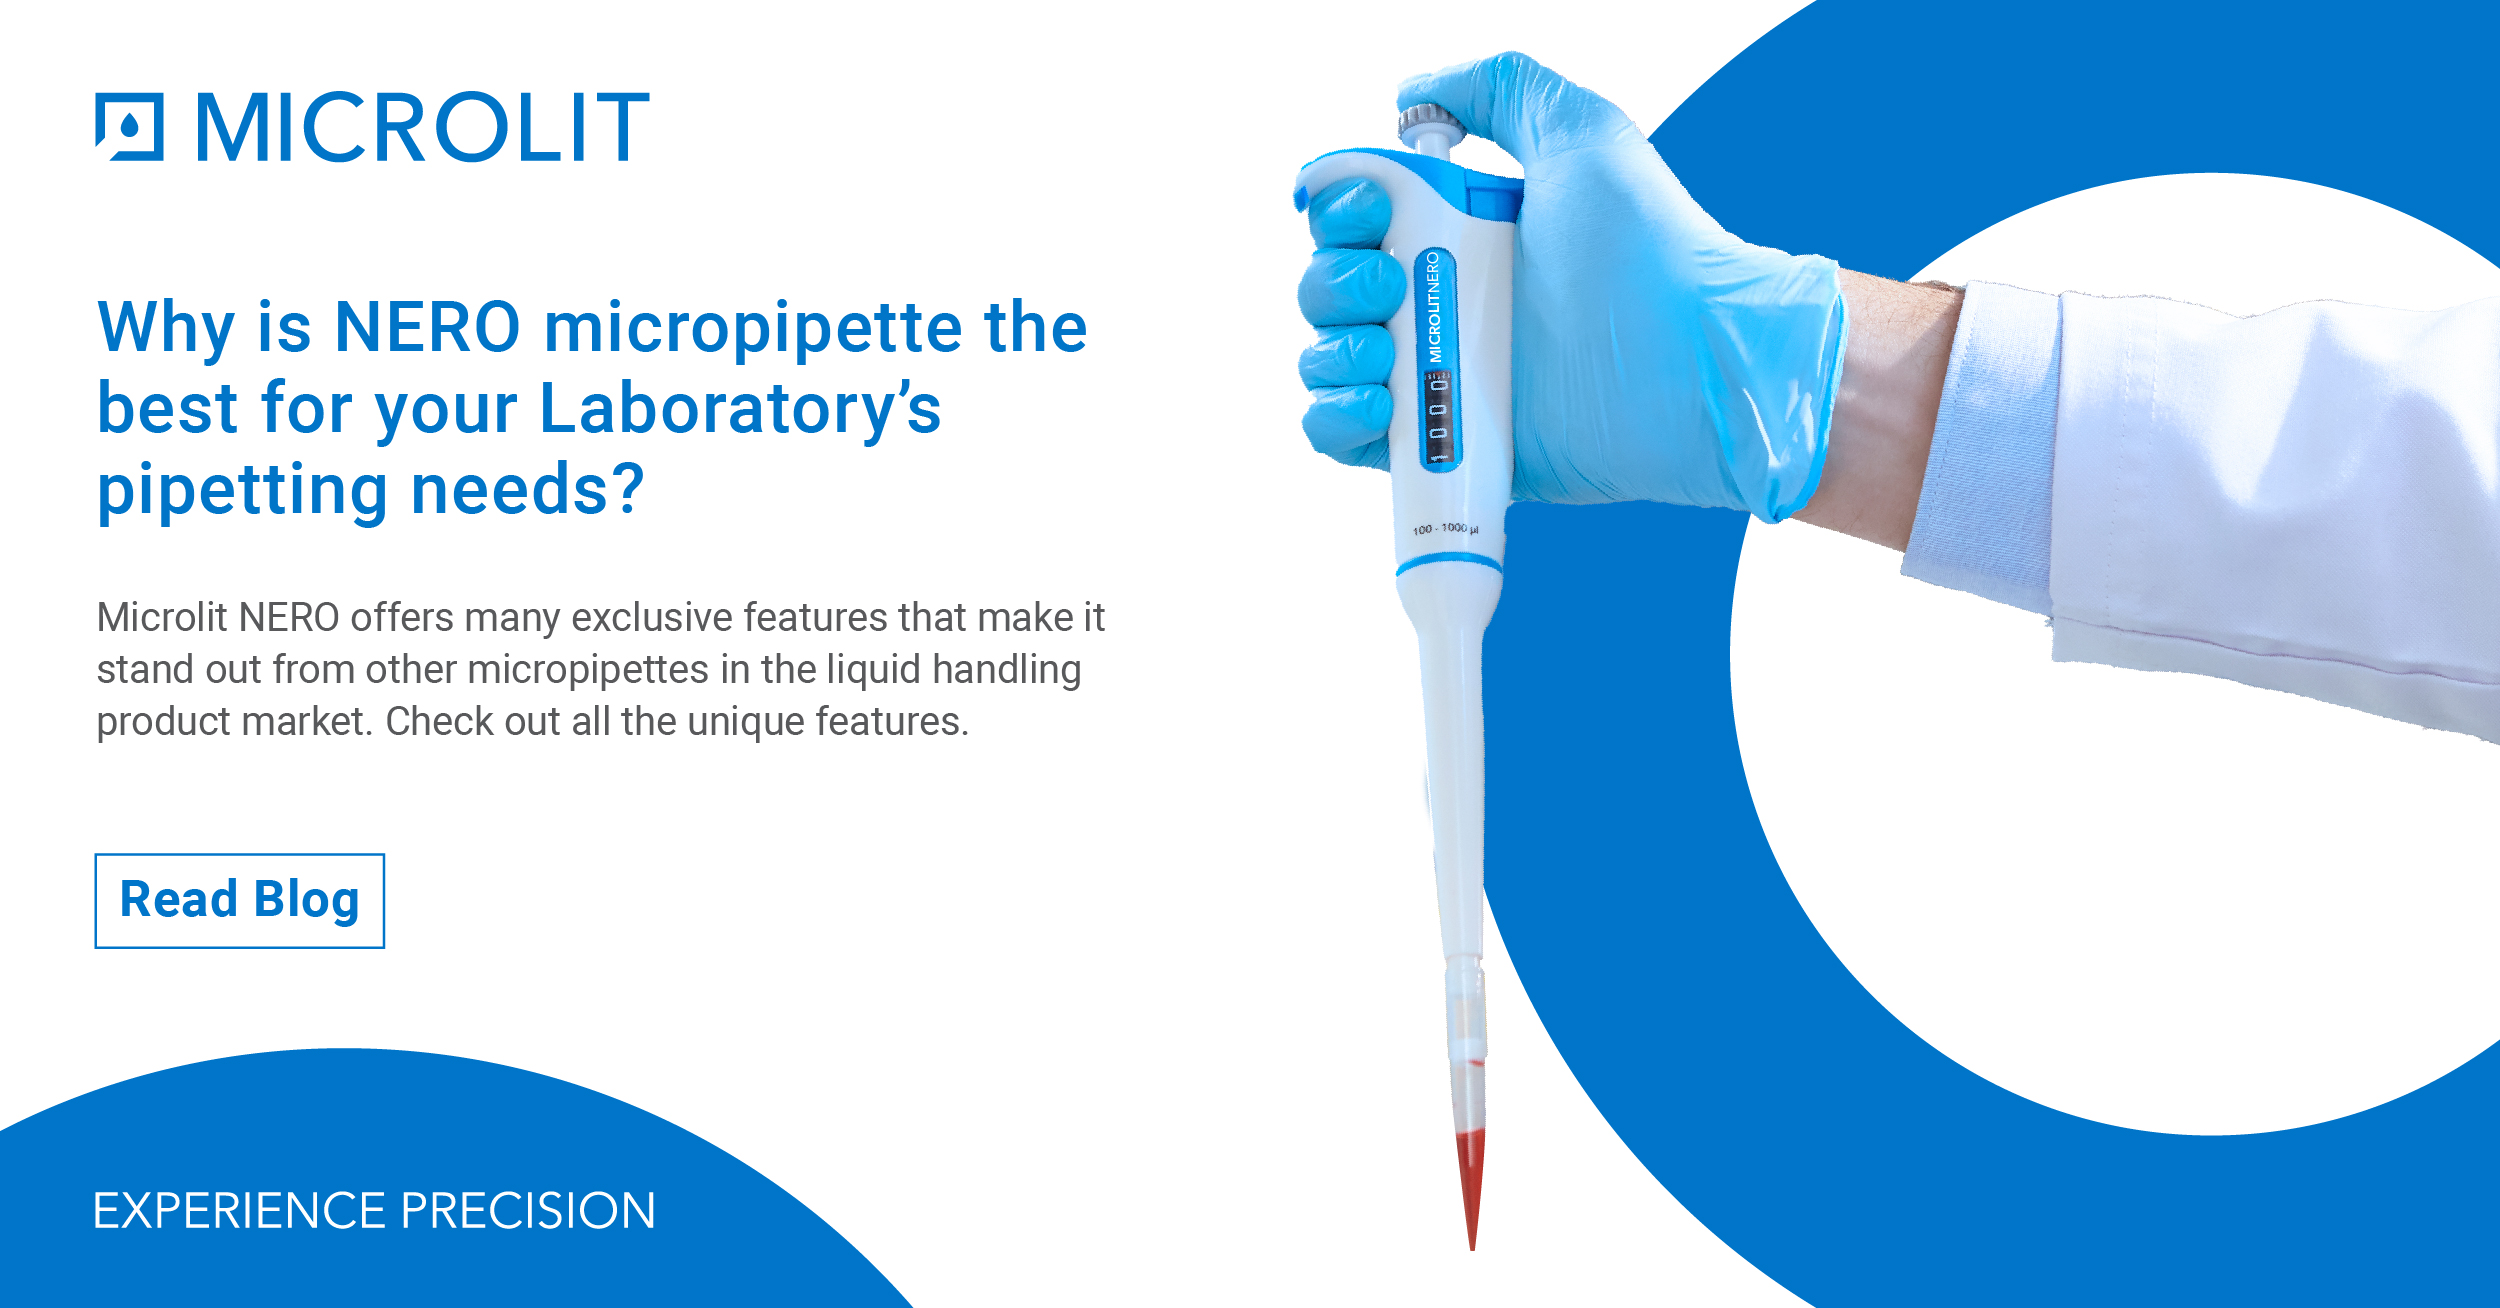 Why is NERO micropipette the best for your Laboratory’s pipetting needs?